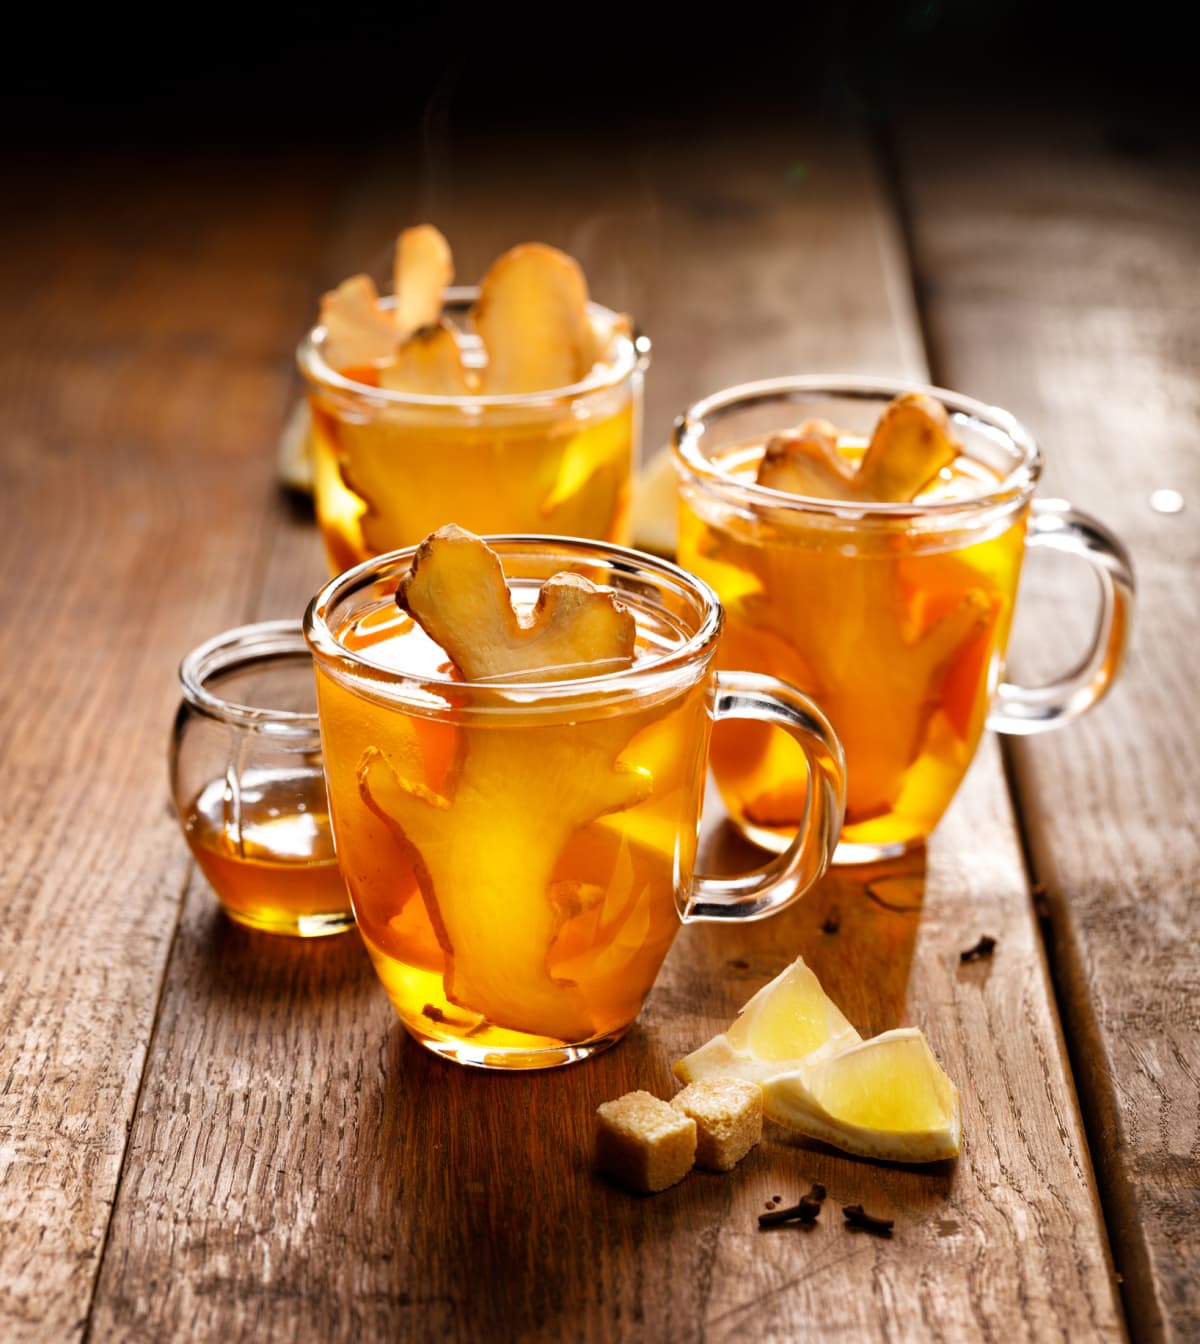 Tea with lemon and ginger on a wooden background rustic style, close up